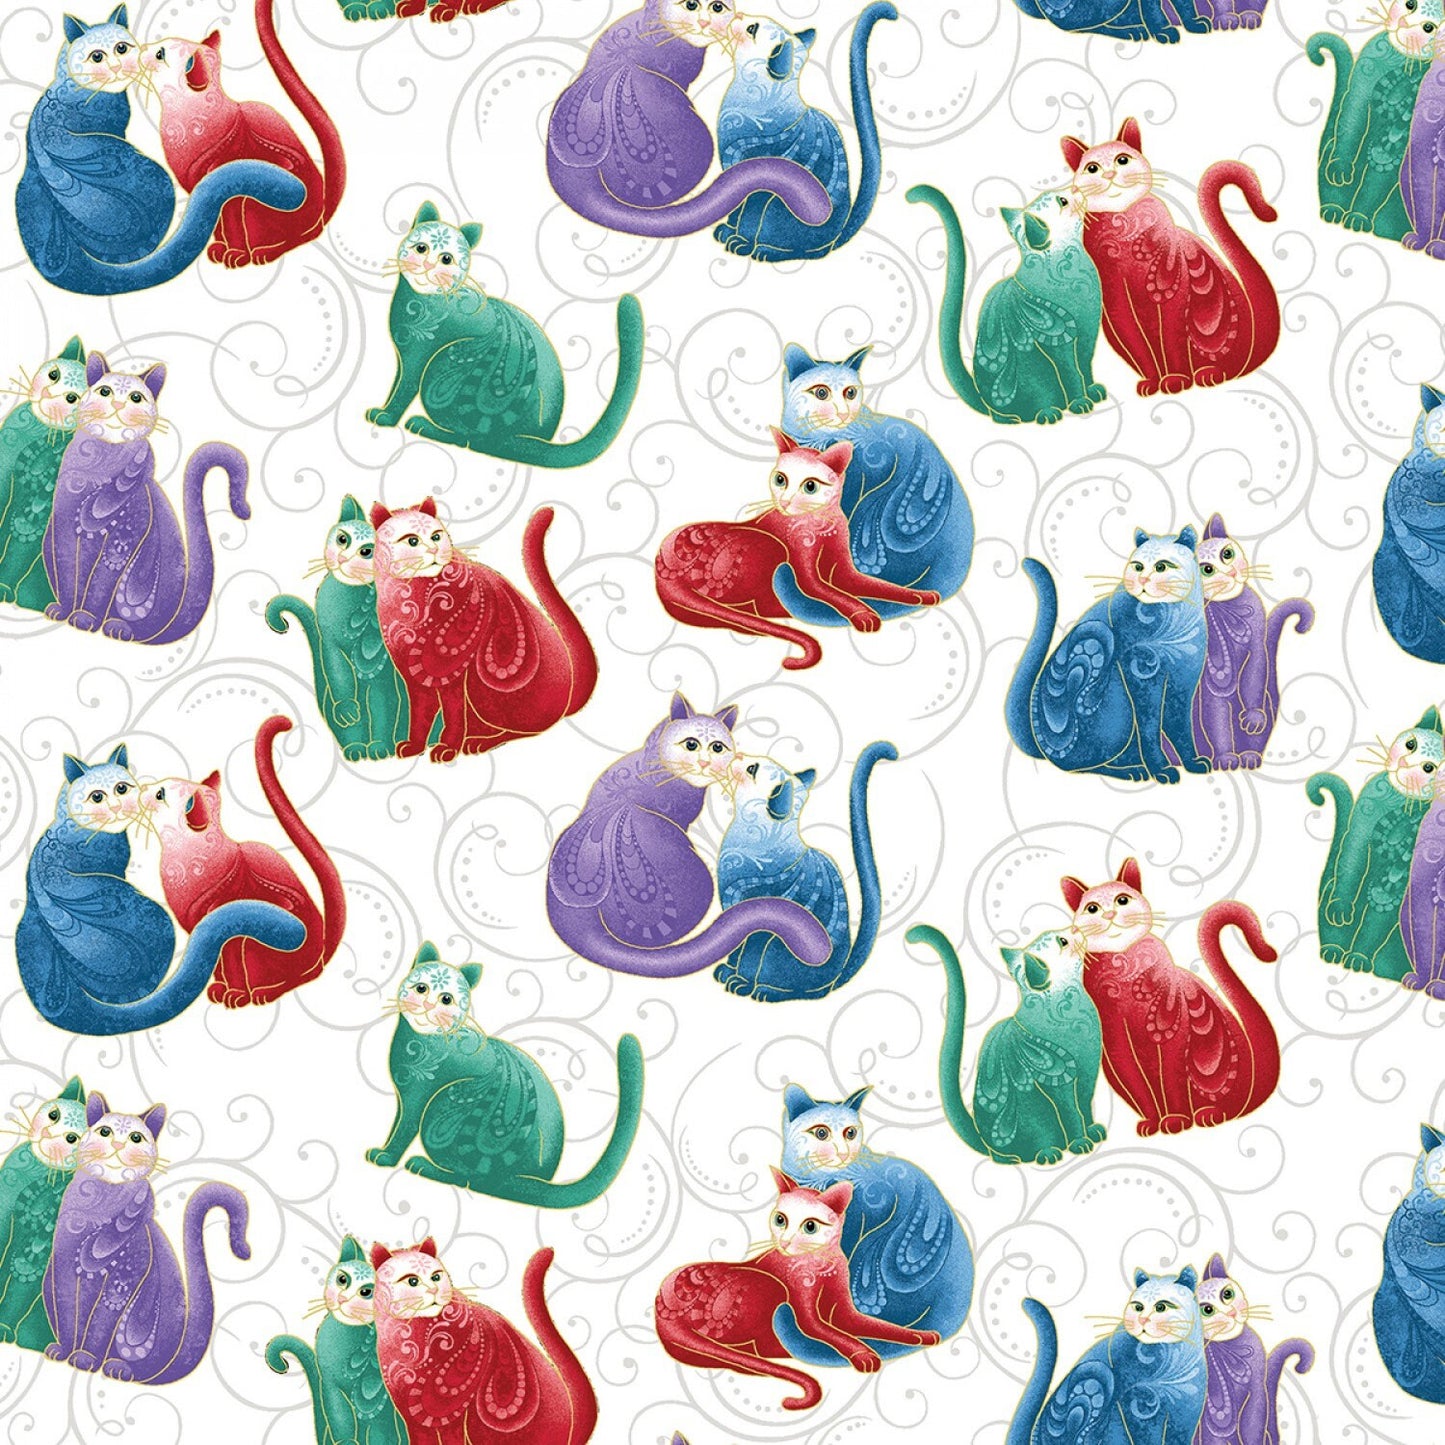 Cat-I-Tude 2 Purrfect Together by Ann Lauer Mini Scrolls Cats White Metallic  7558MB-09 Cotton Woven Fabric